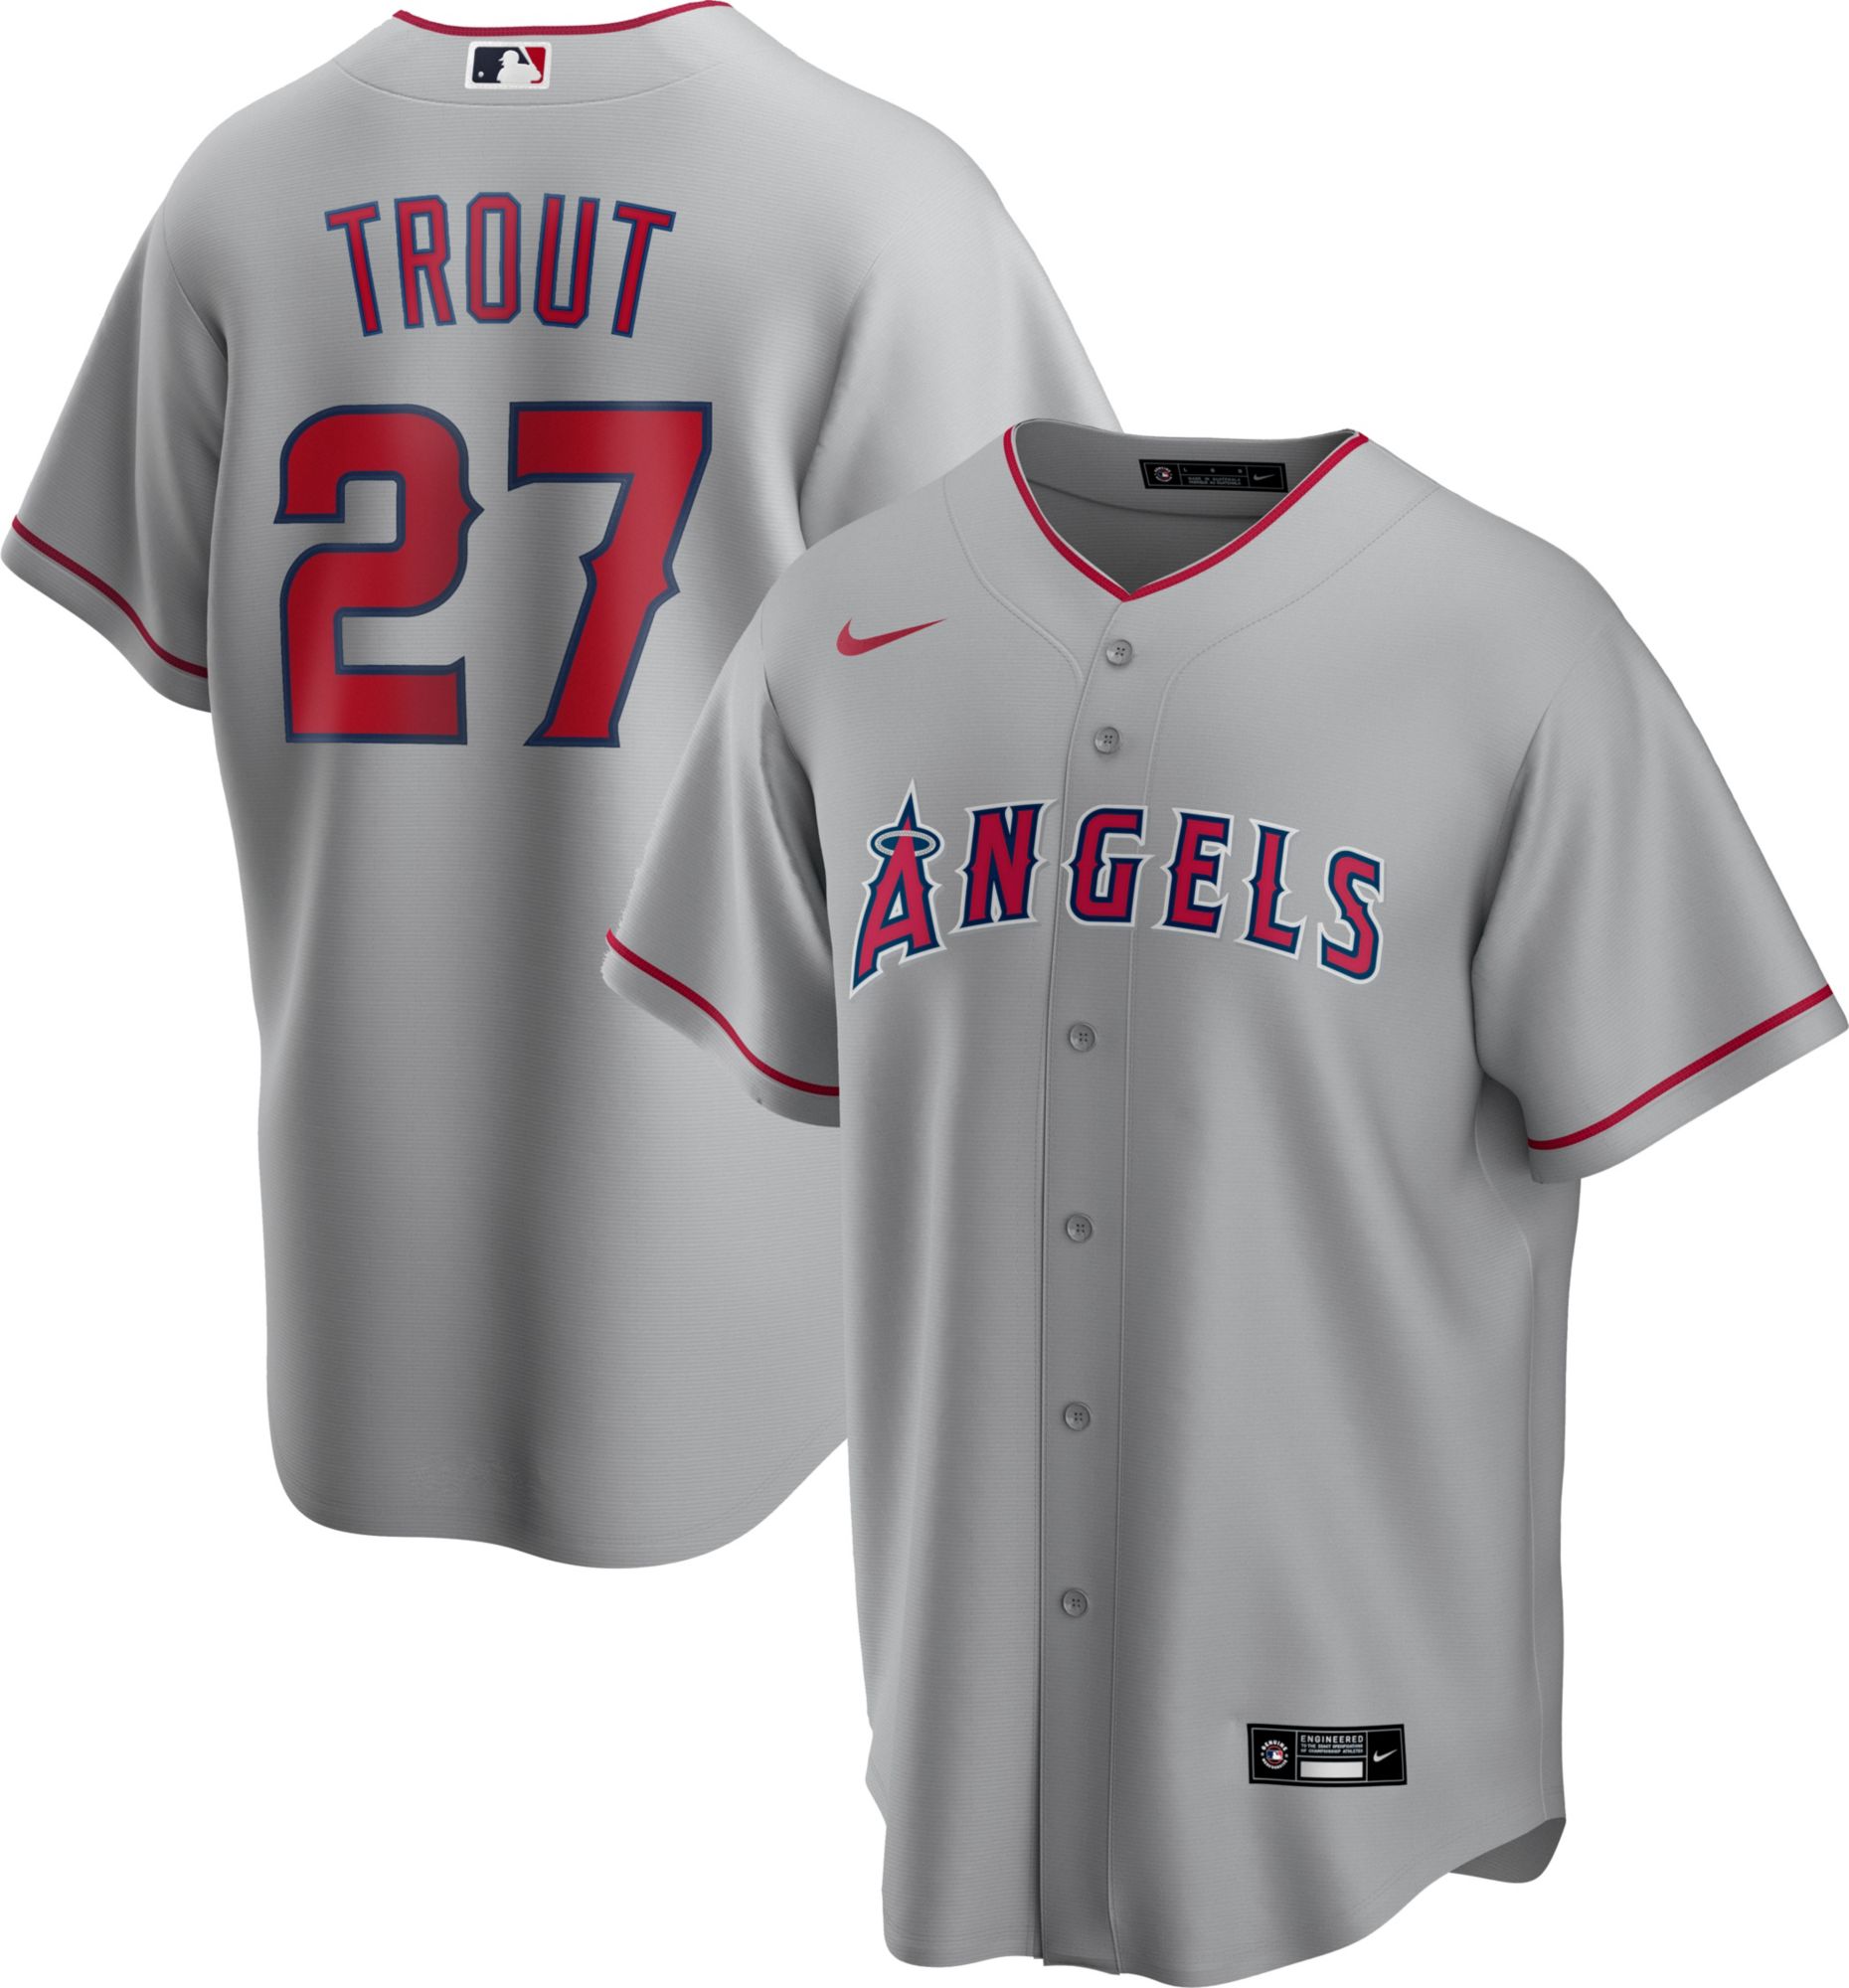 mike trout jersey